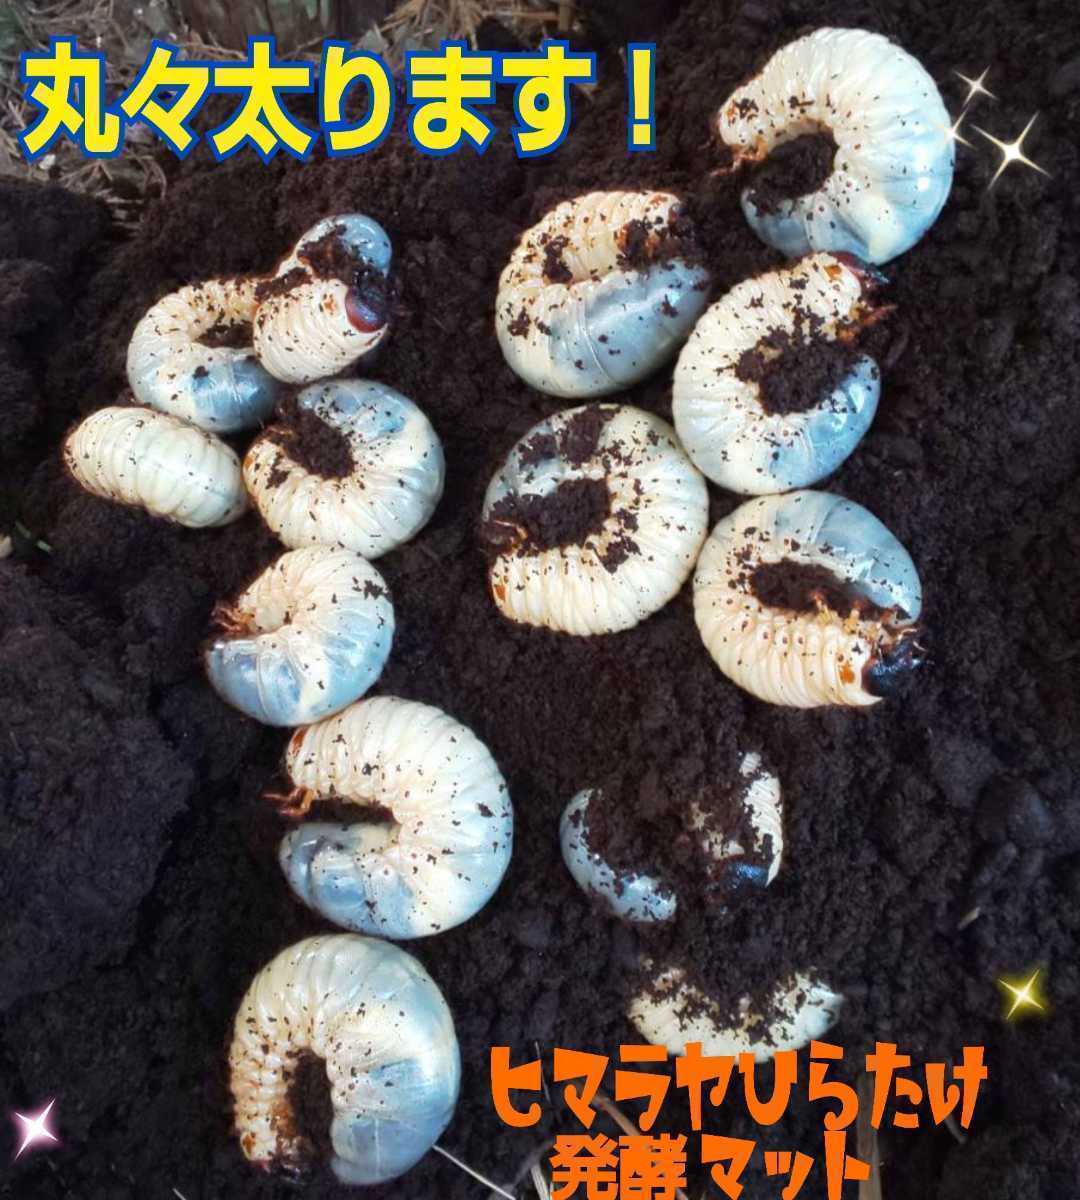  rhinoceros beetle larva . on a grand scale become [ improvement version ]himalaya common .. departure . mat [20L] larva. bait * production egg . eminent! nutrition addition agent go in *. insect *kobae... not!